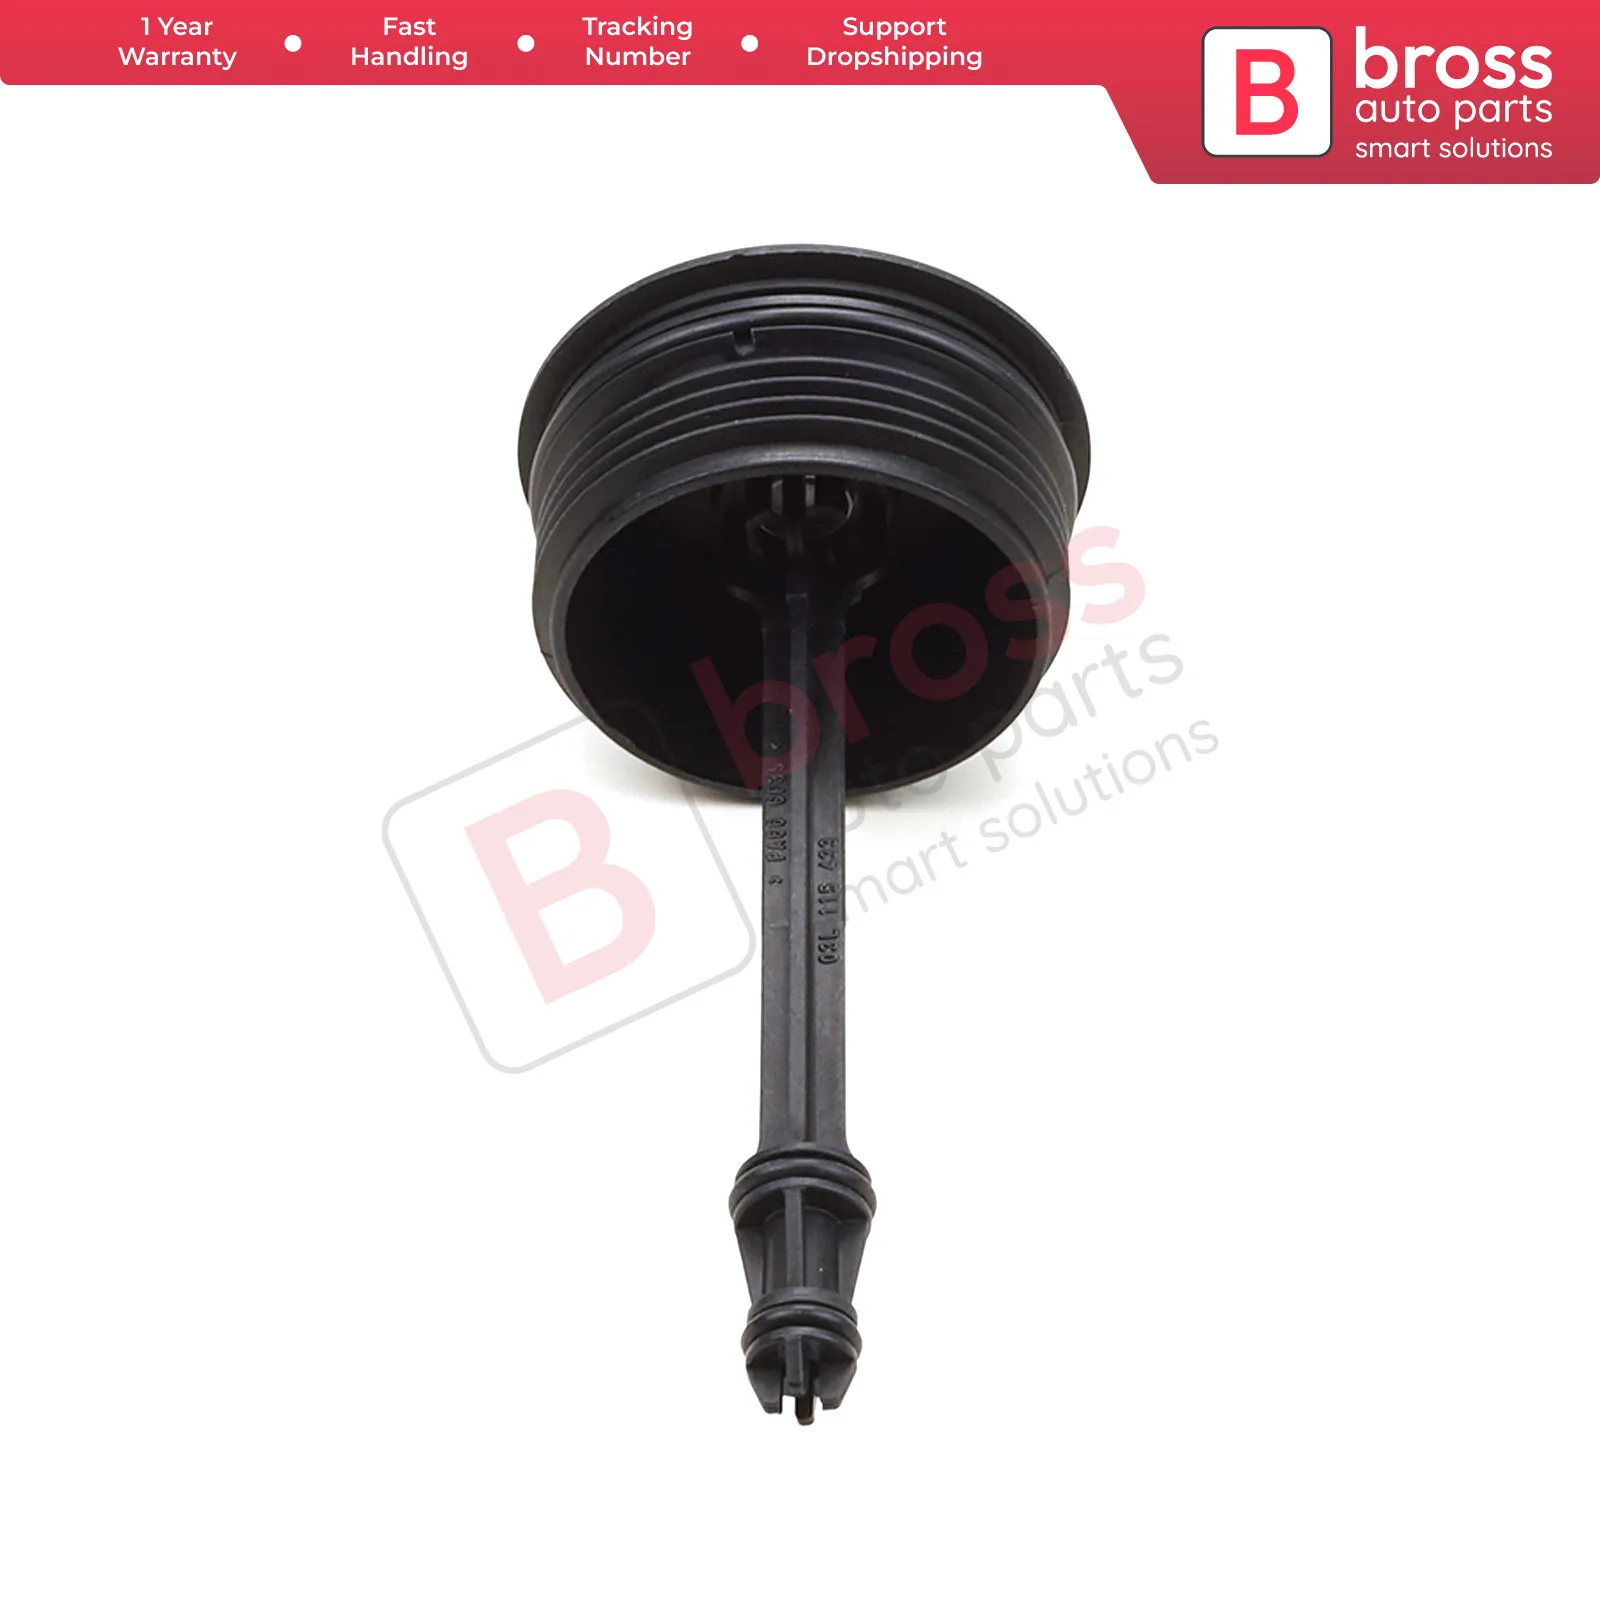 

Bross Auto Parts BSP767 Oil Filter Cover Cap 03L115433 for VW Audi Seat Skoda 1.6 2.0 Diesel Engine Turkish Store Made in Turkey